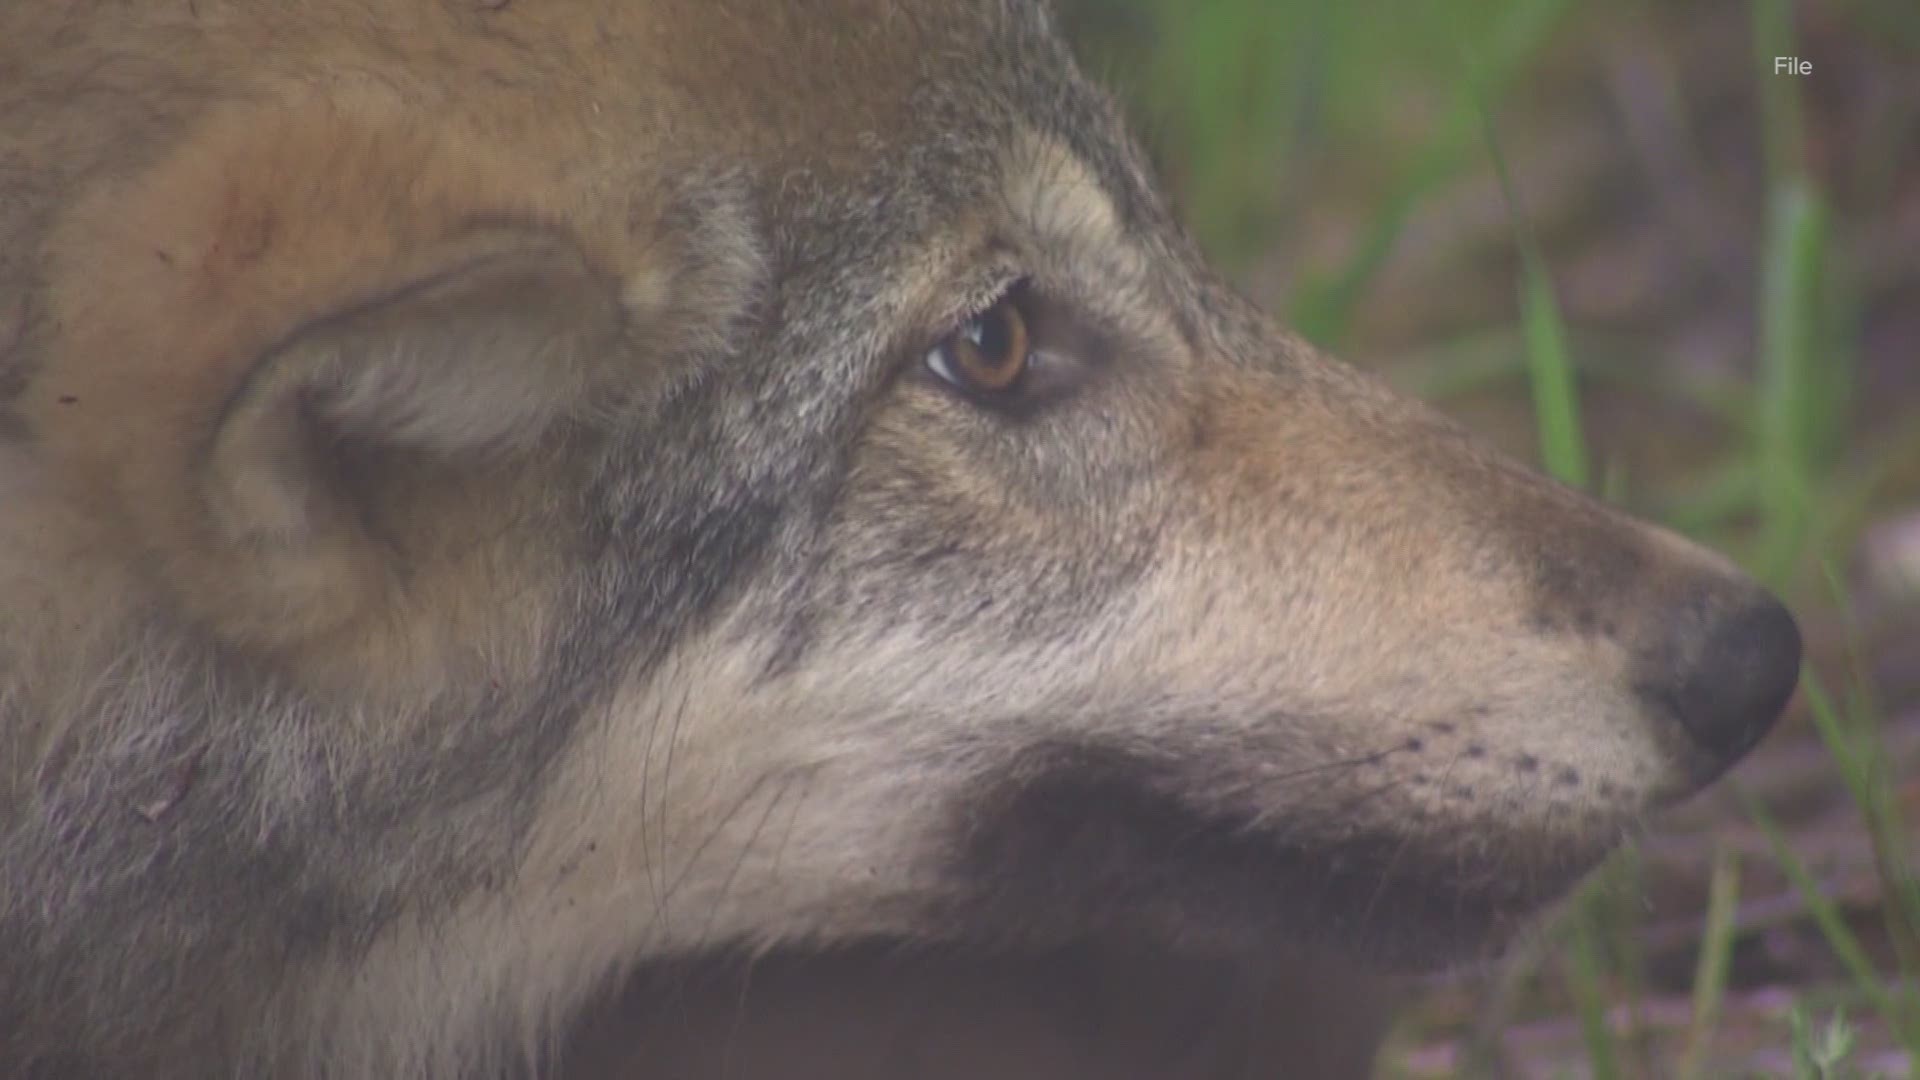 Wolves are returning to Washington from neighboring populations. So how will killing hundreds in Idaho impact recovery here?